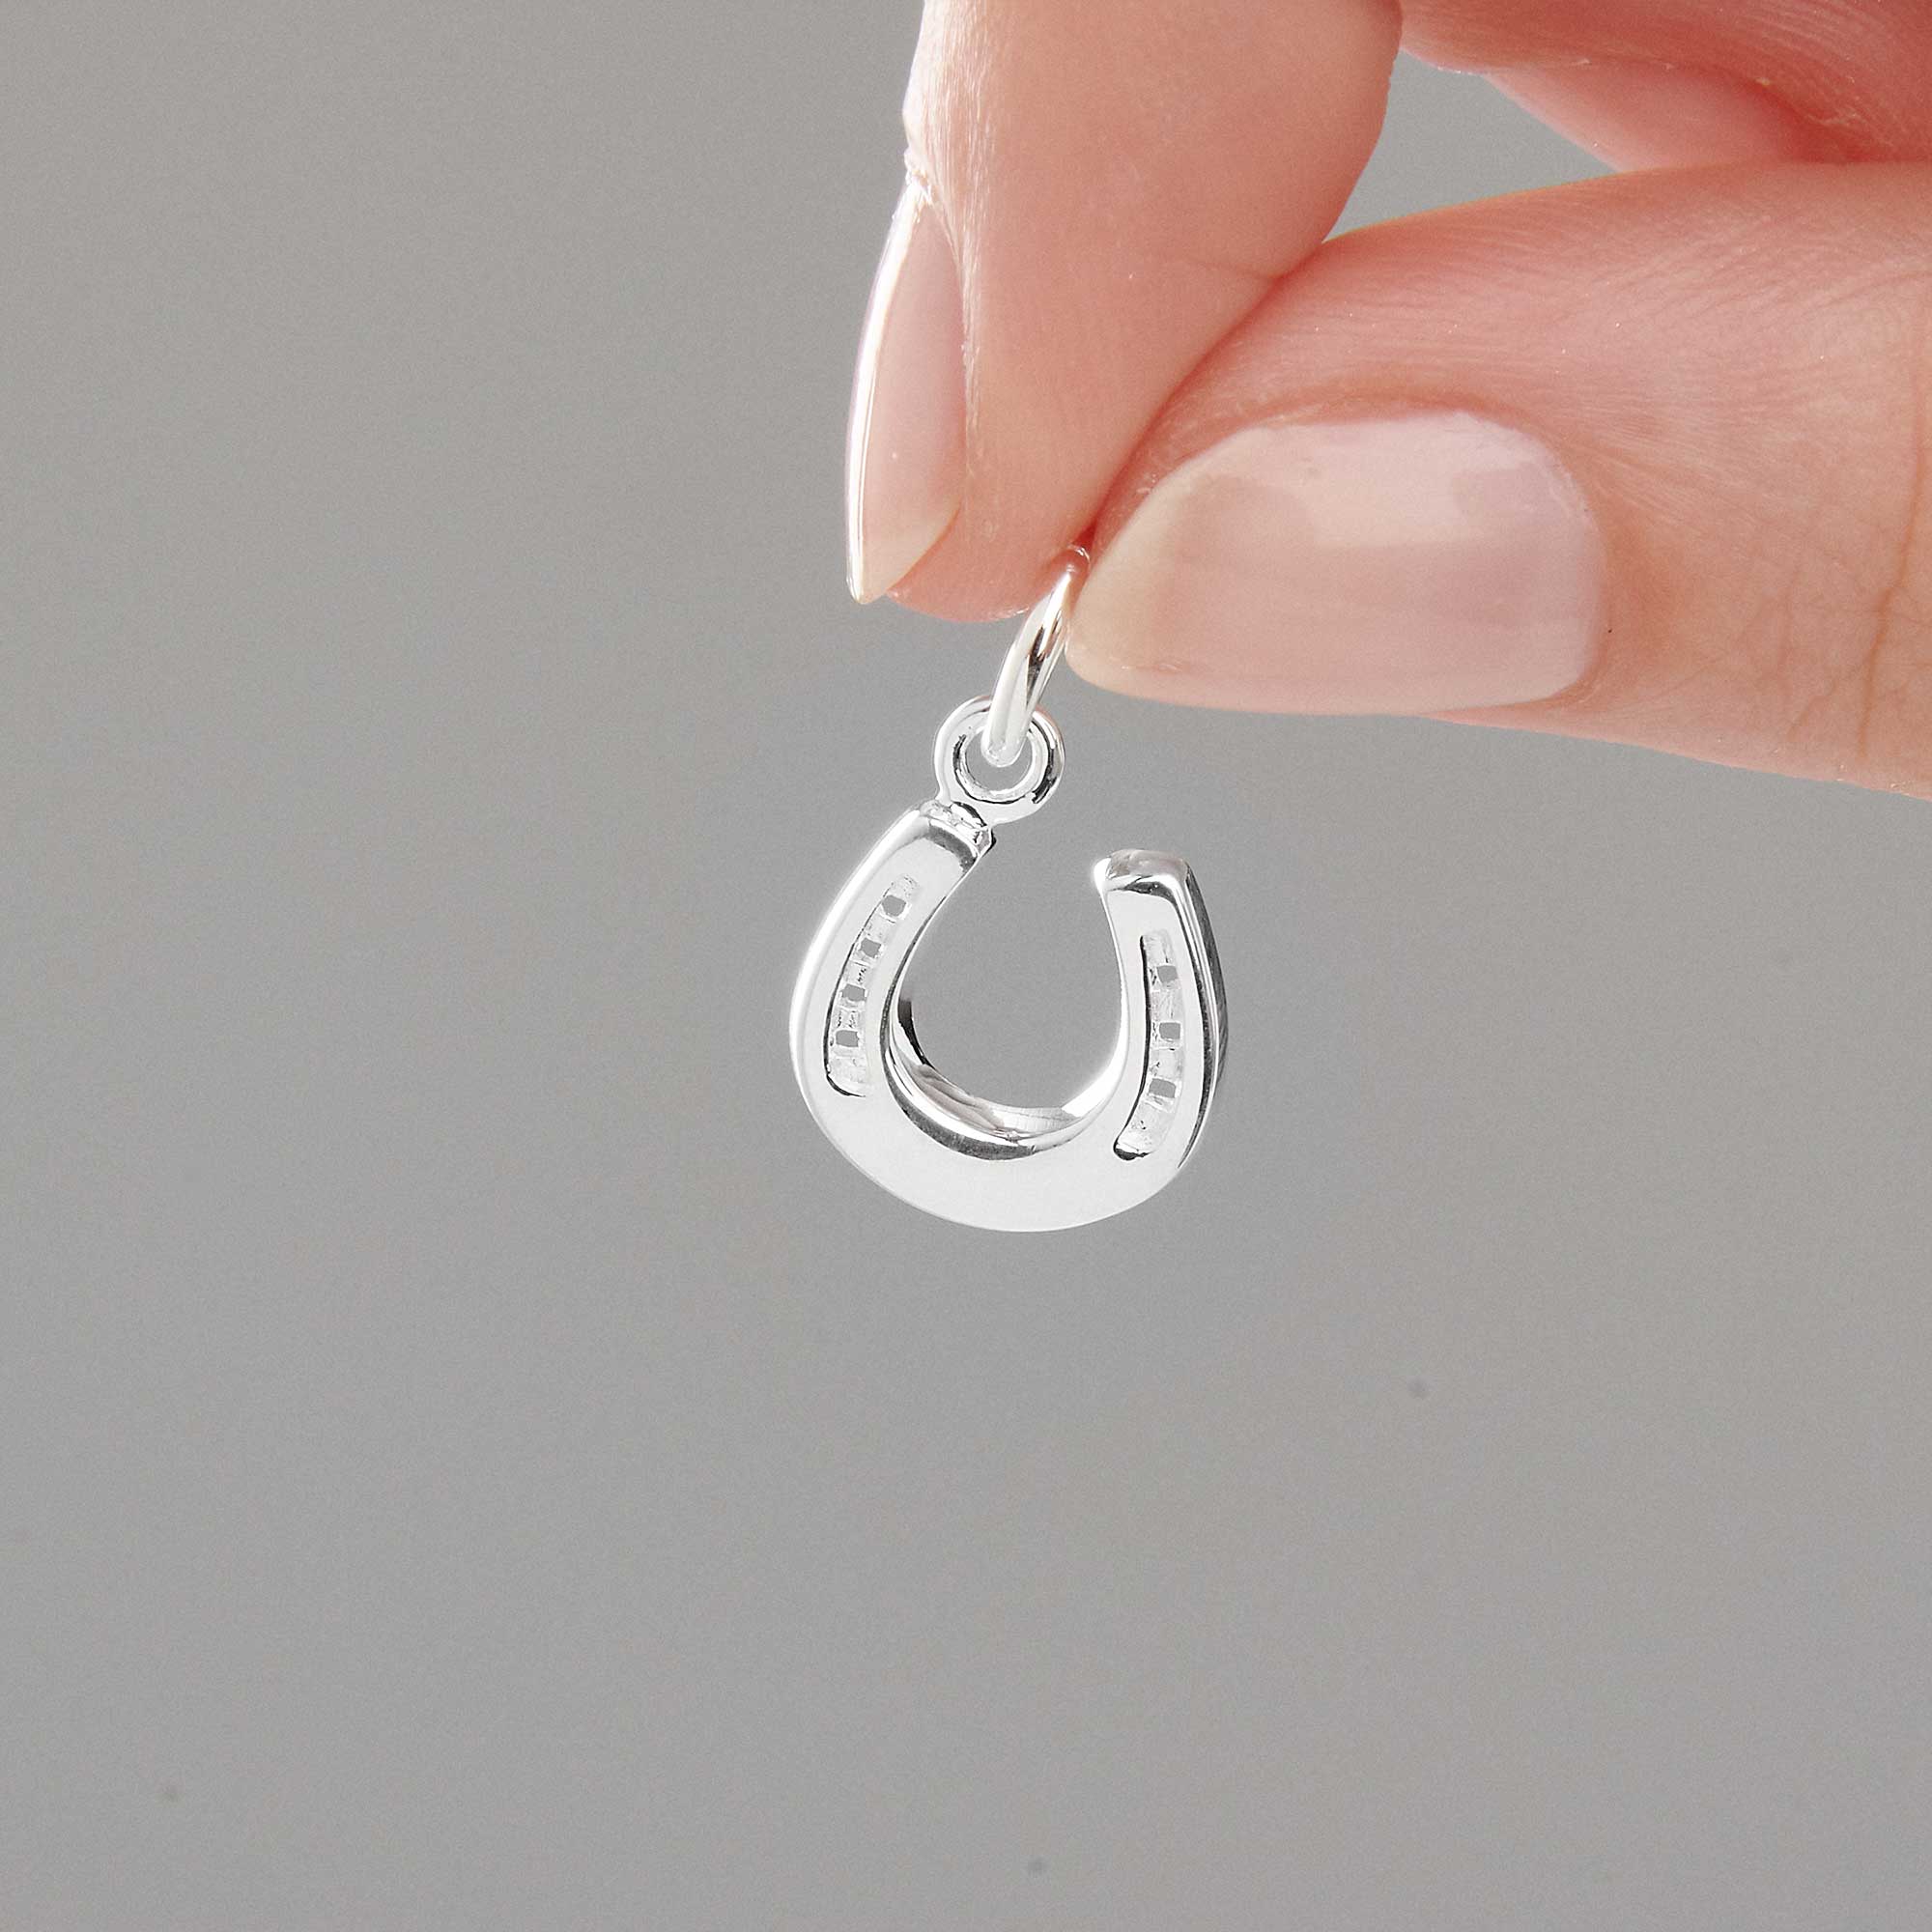 A good luck charm in solid sterling silver - fits all charm bracelets and makes a delicate lucky necklace.